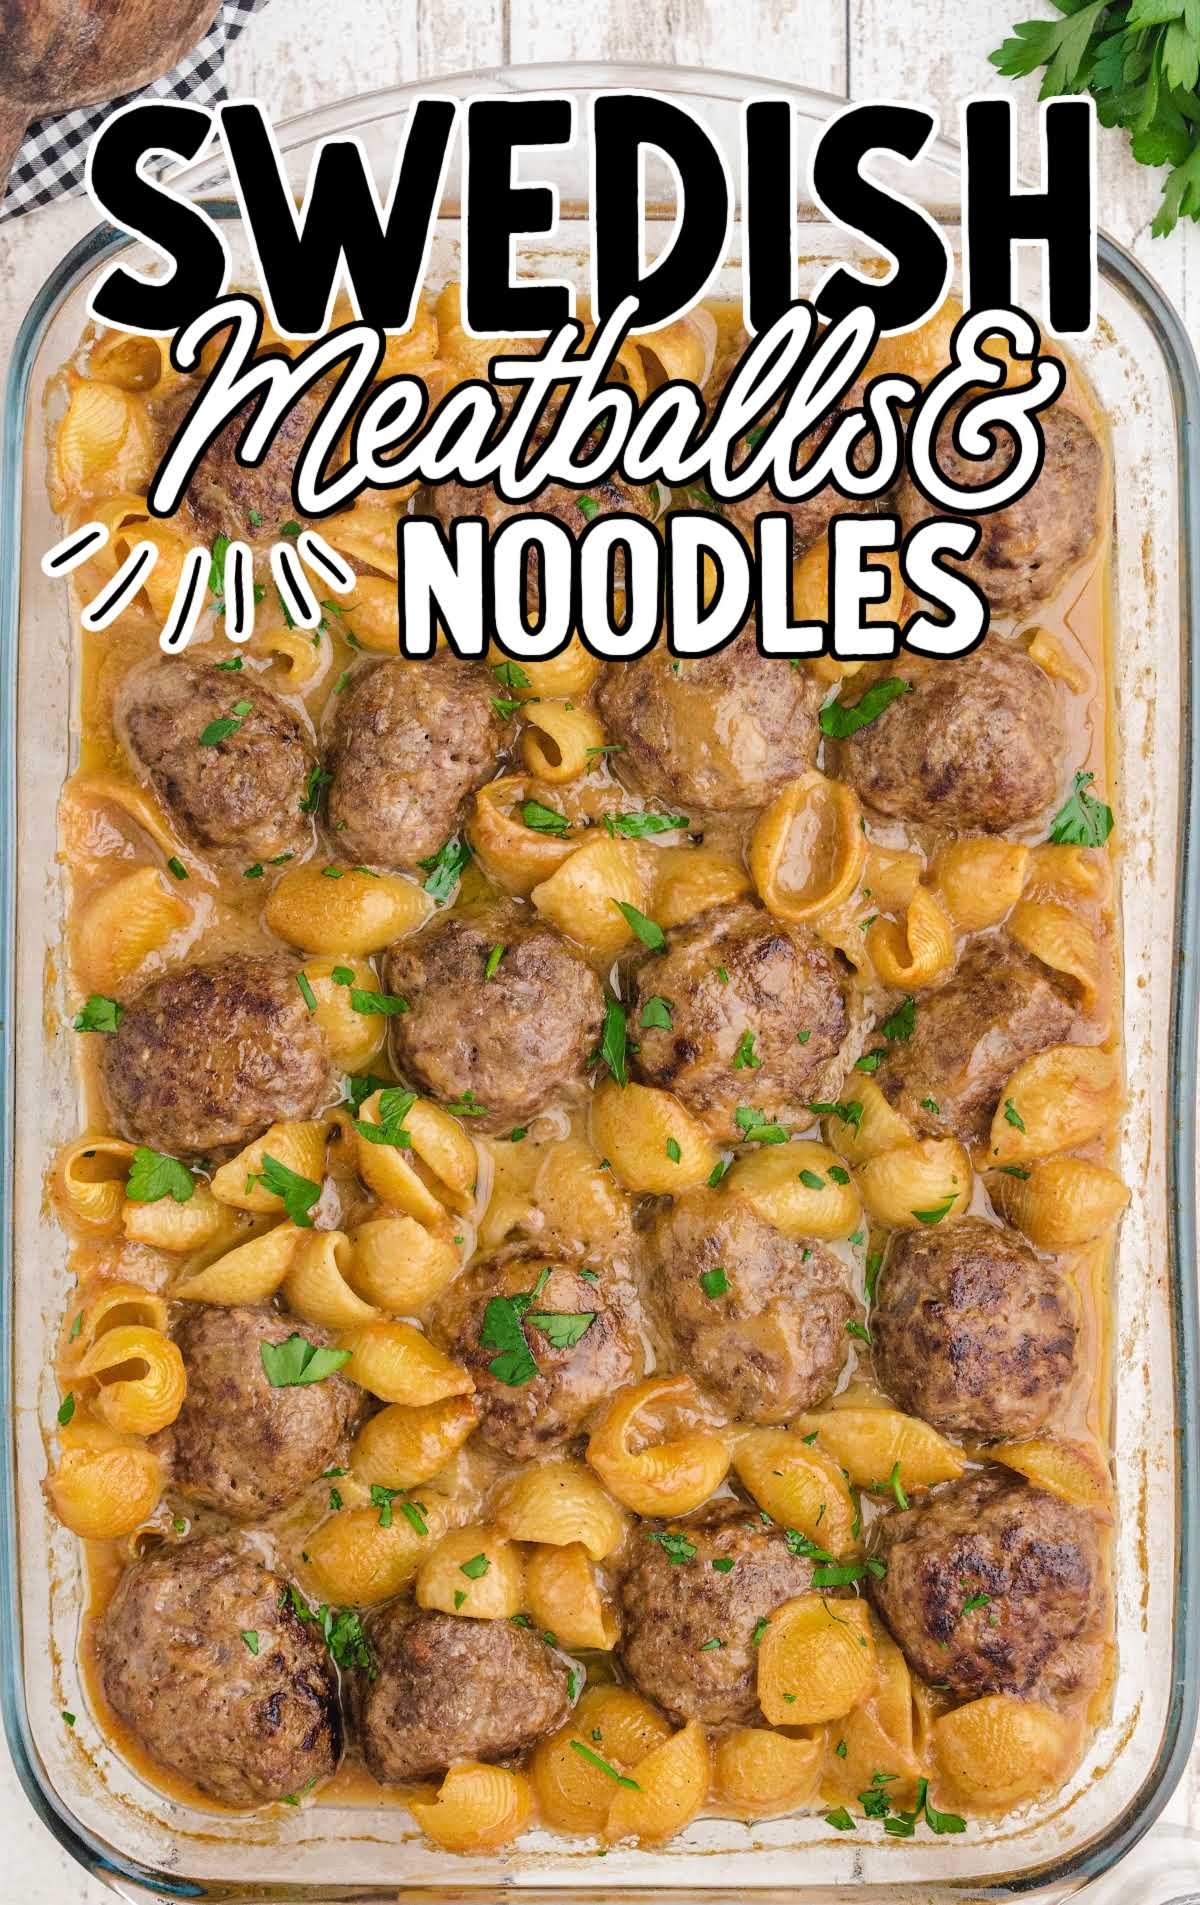 swedish meatballs and noodles garnished with parsley in a baking dish